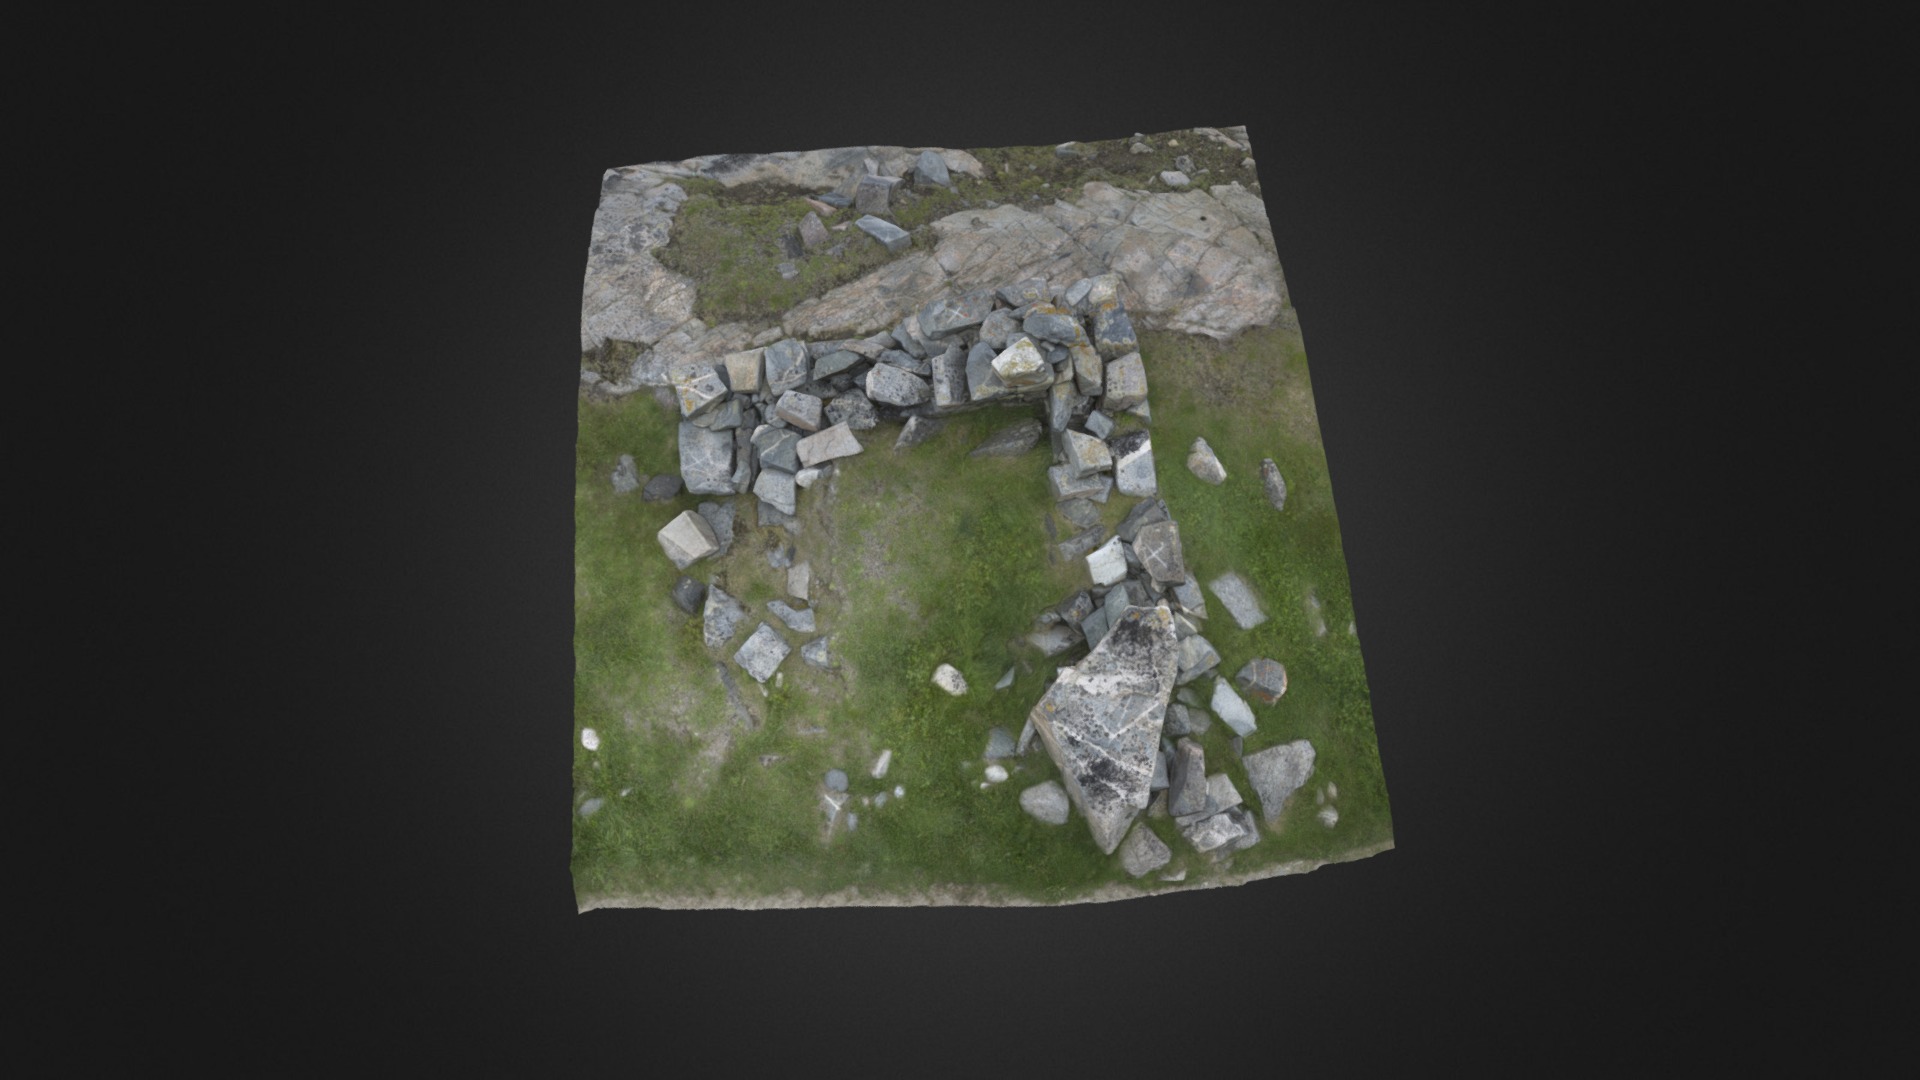 3D model Norse warehouse – Igaliku Kujaleg, Greenland - This is a 3D model of the Norse warehouse - Igaliku Kujaleg, Greenland. The 3D model is about a stone wall with a hole in it.